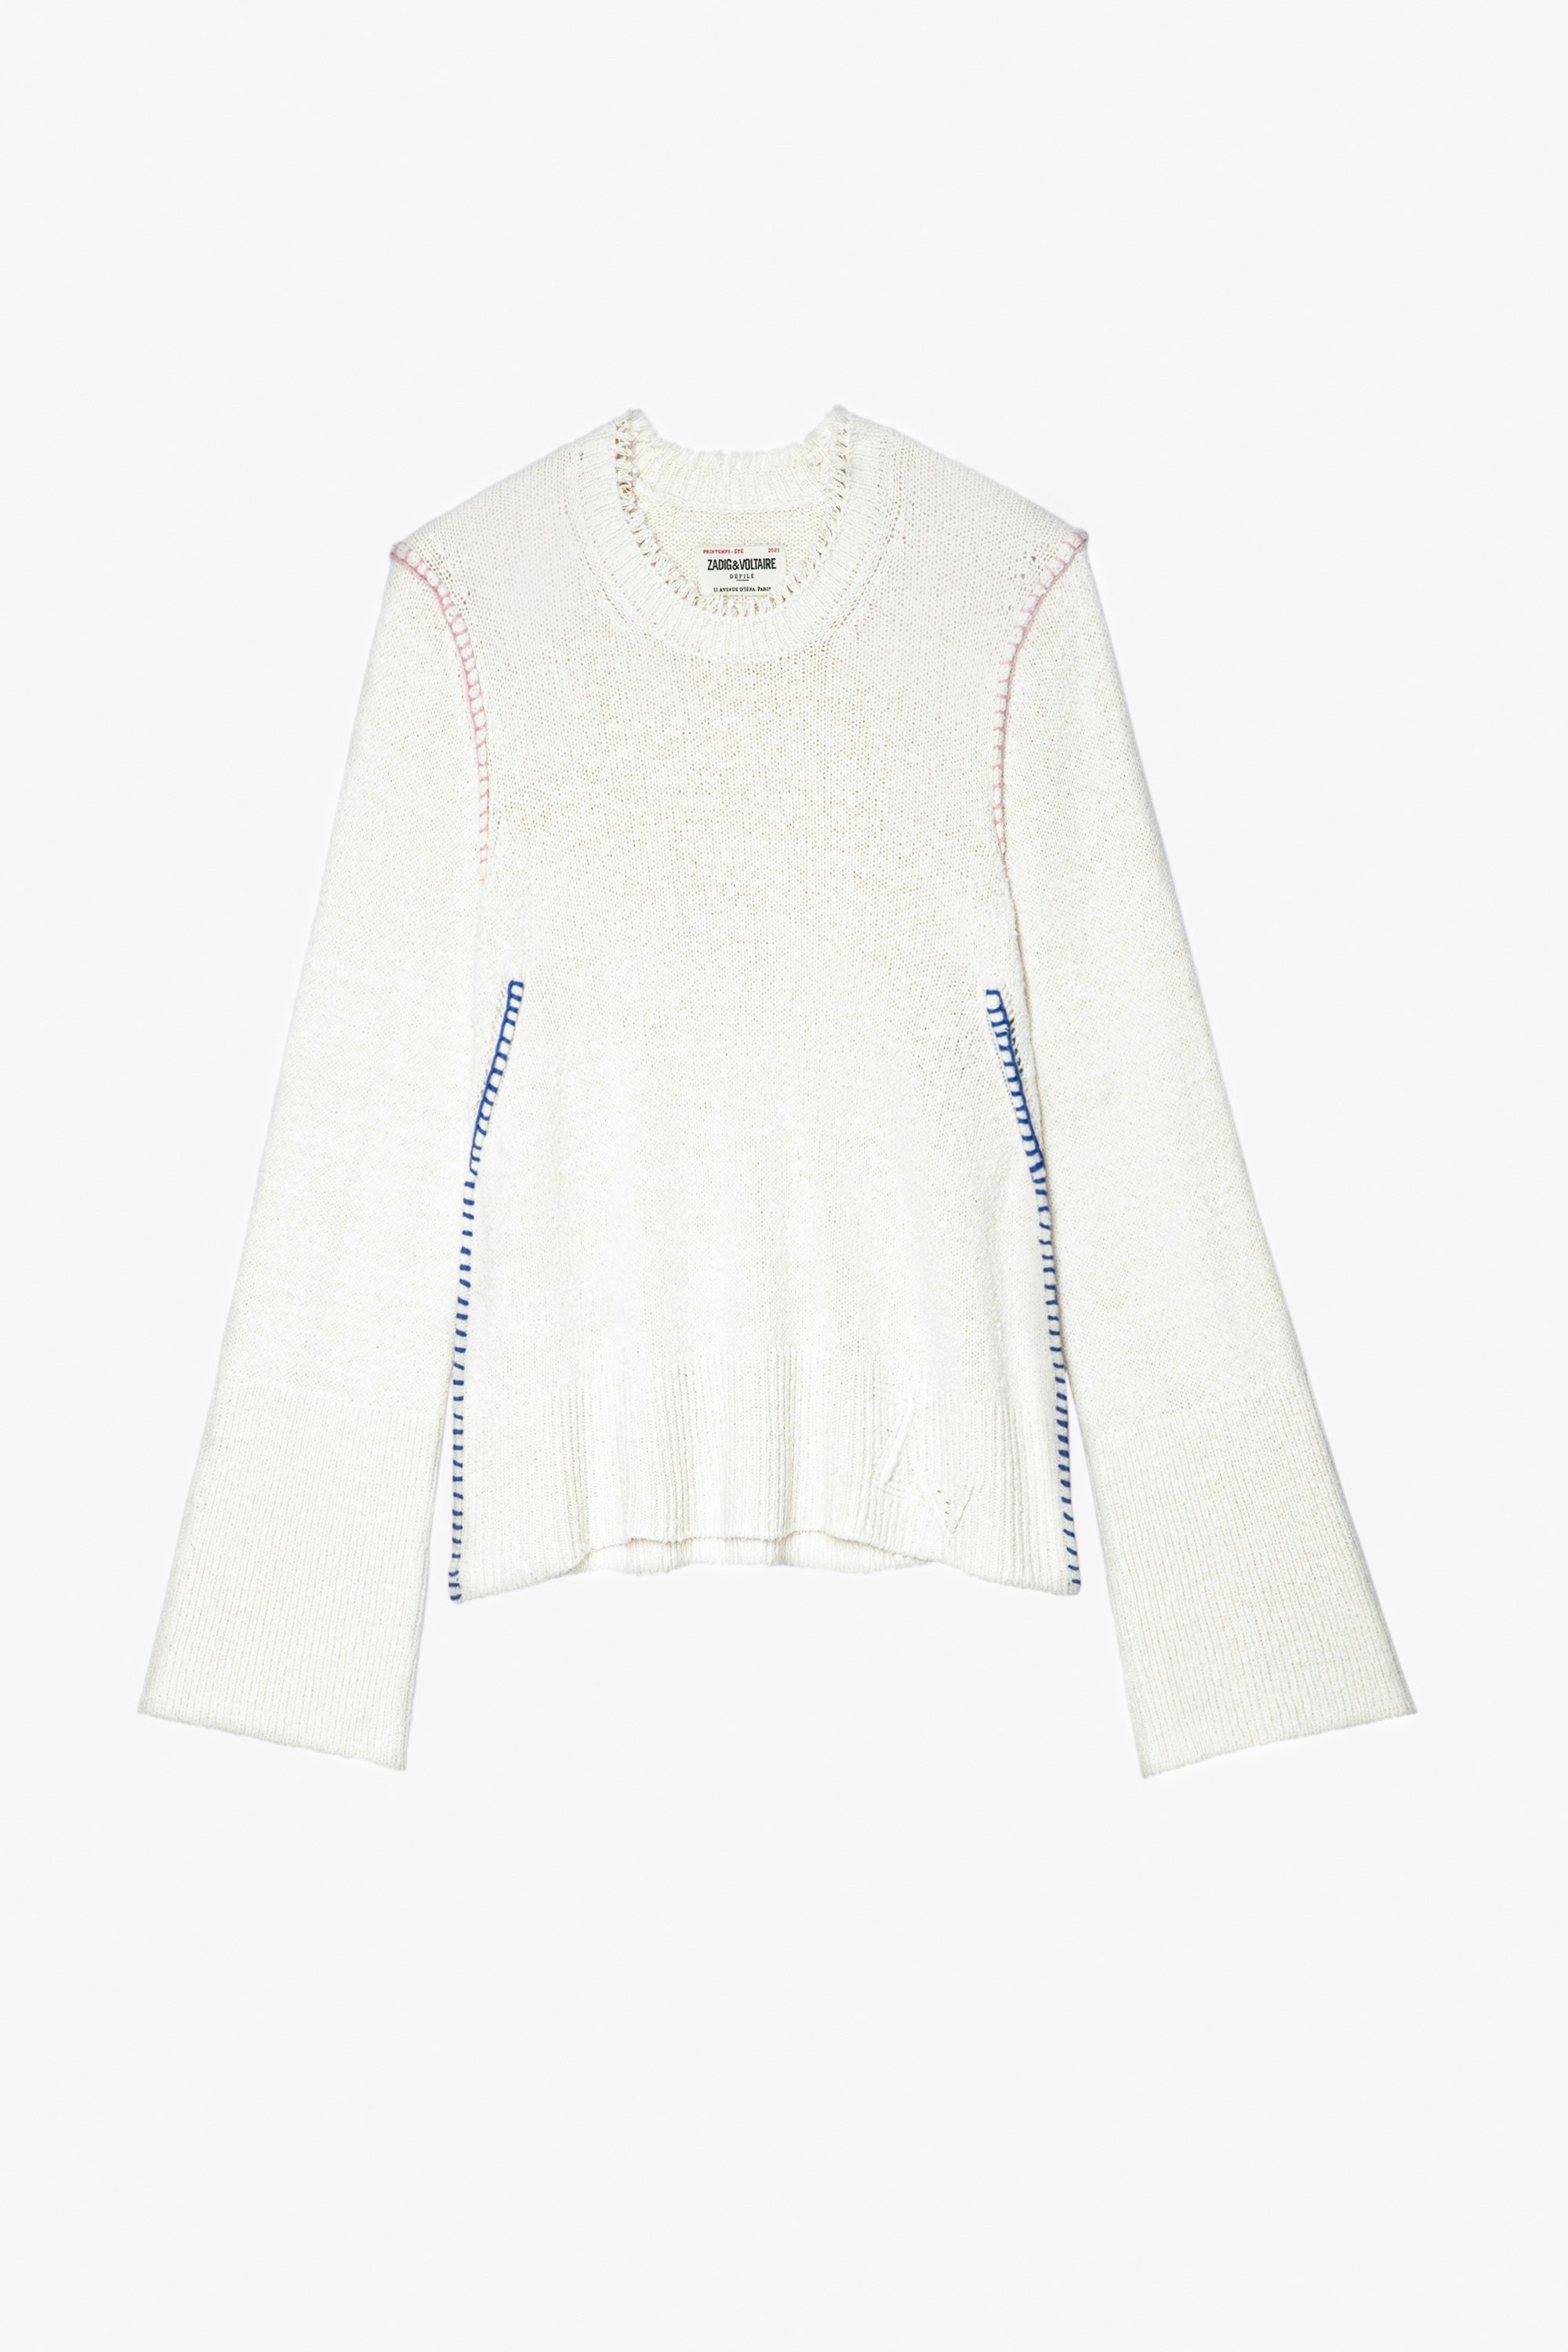 Louna Pullover Women's off-white silk pullover with fringed edges, topstitching and long oversized sleeves